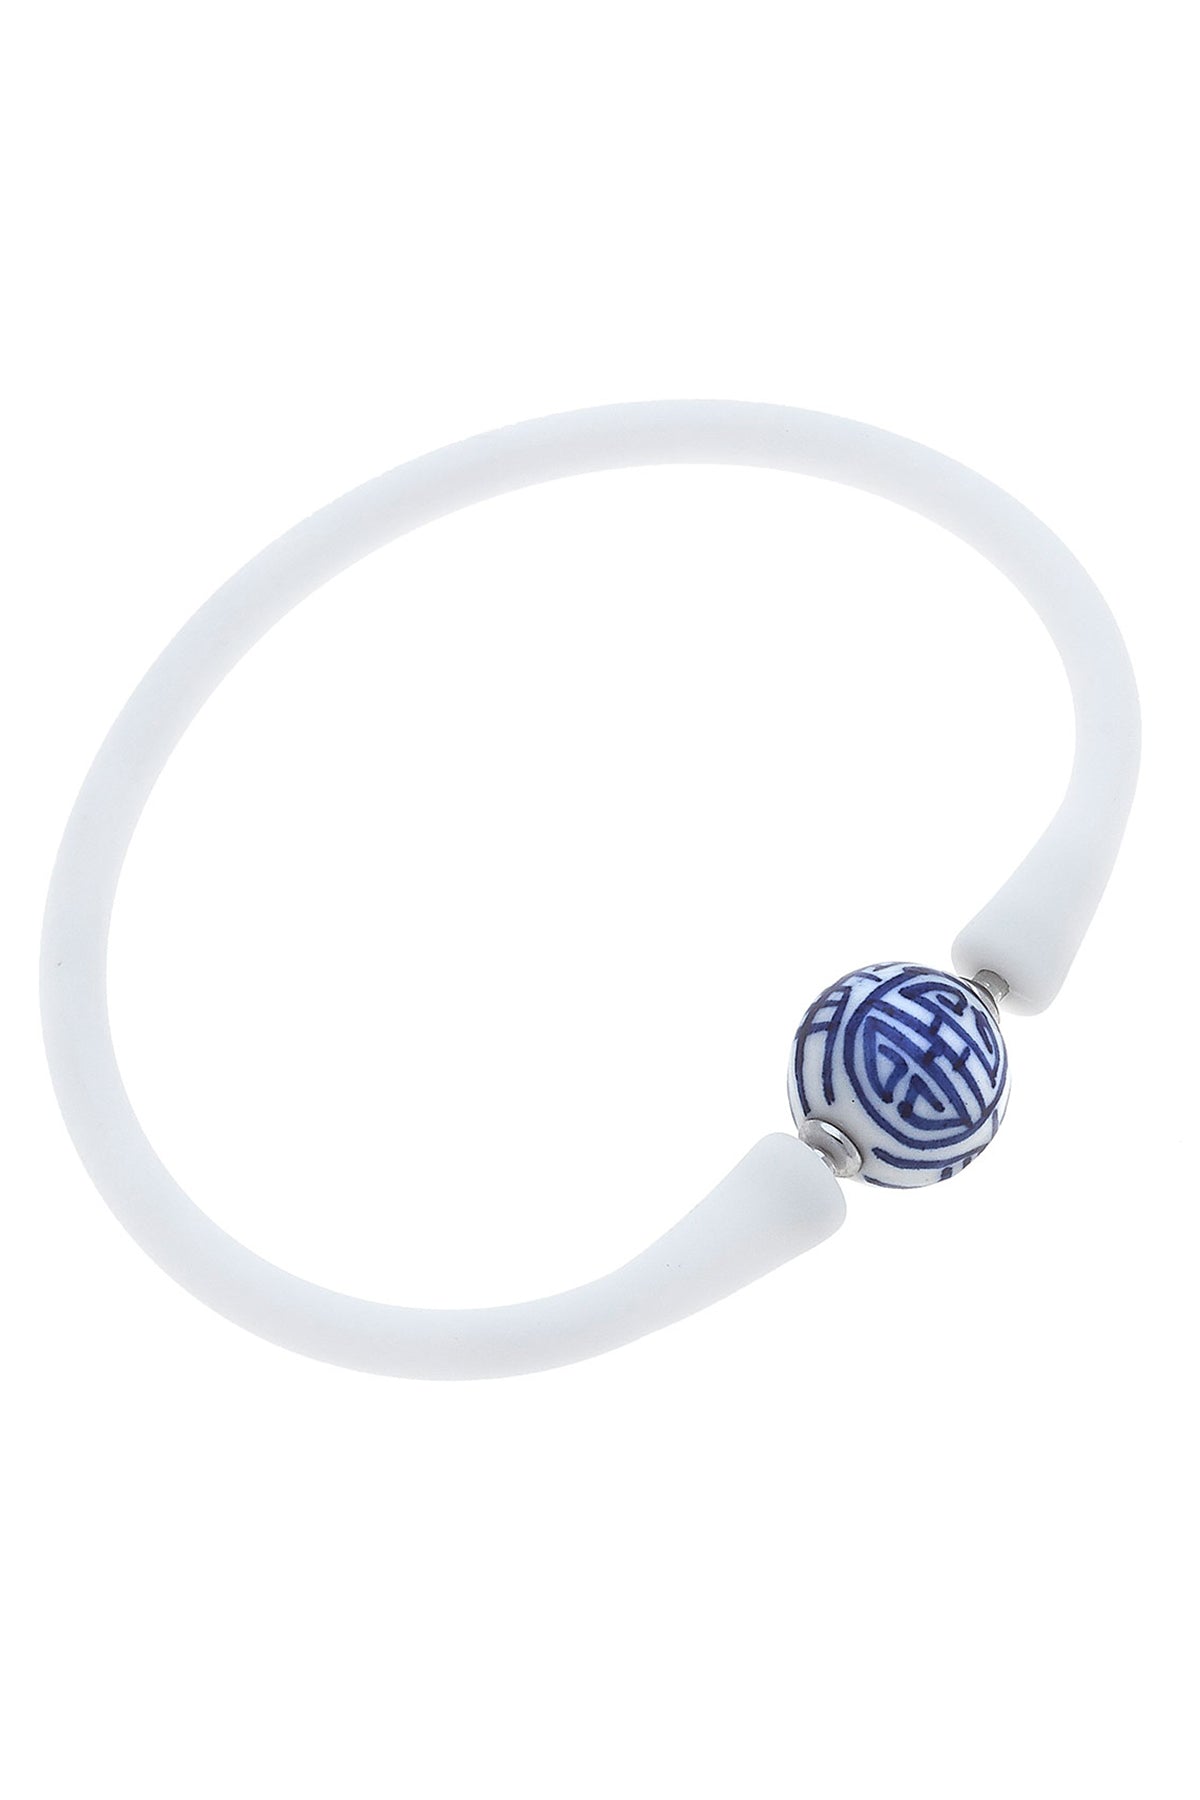 Bali Chinoiserie Bead Silicone Bracelet in White